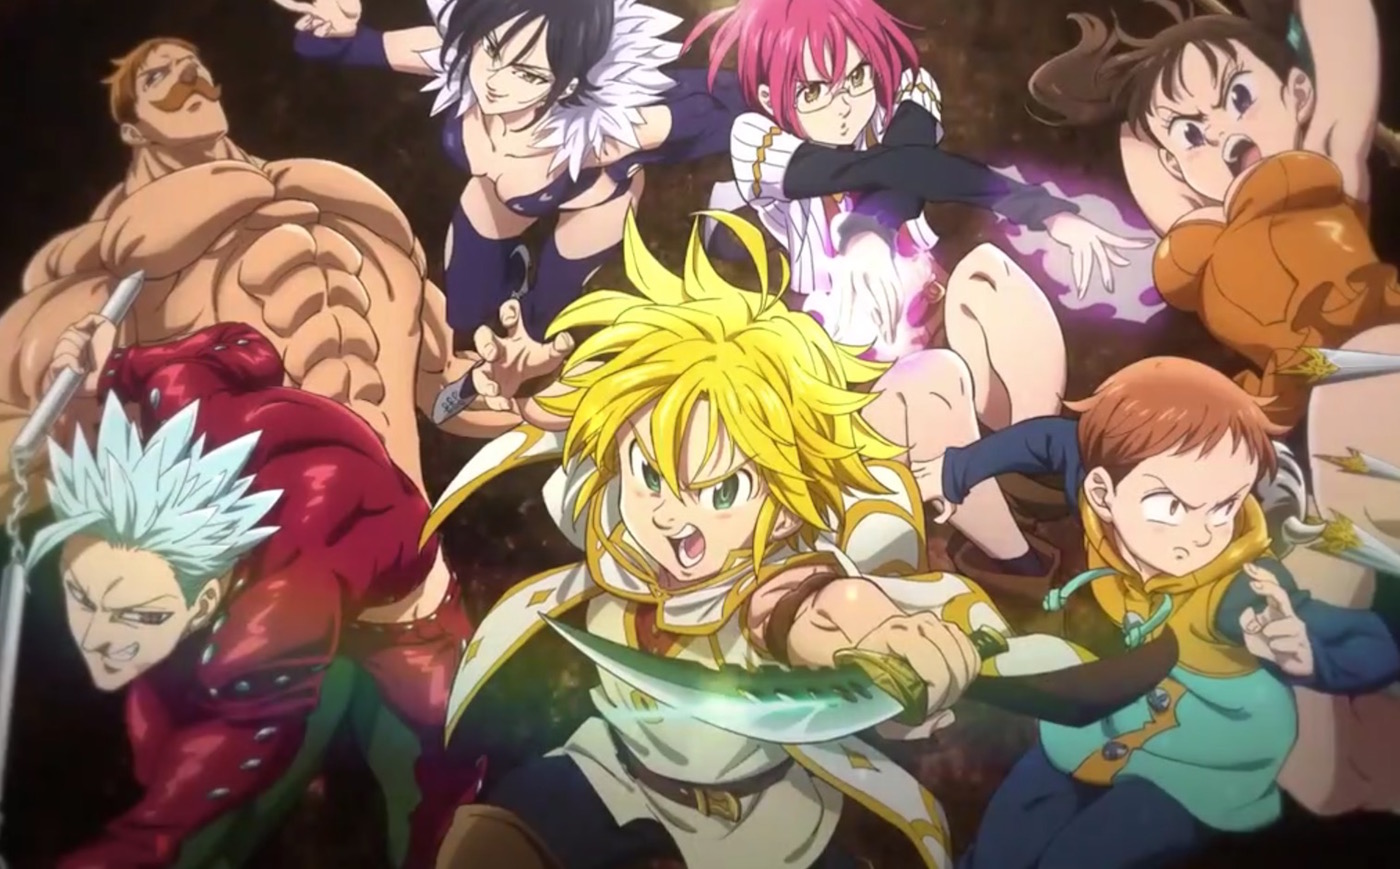 Meet The Seven Deadly Sins Anime Film's New Characters